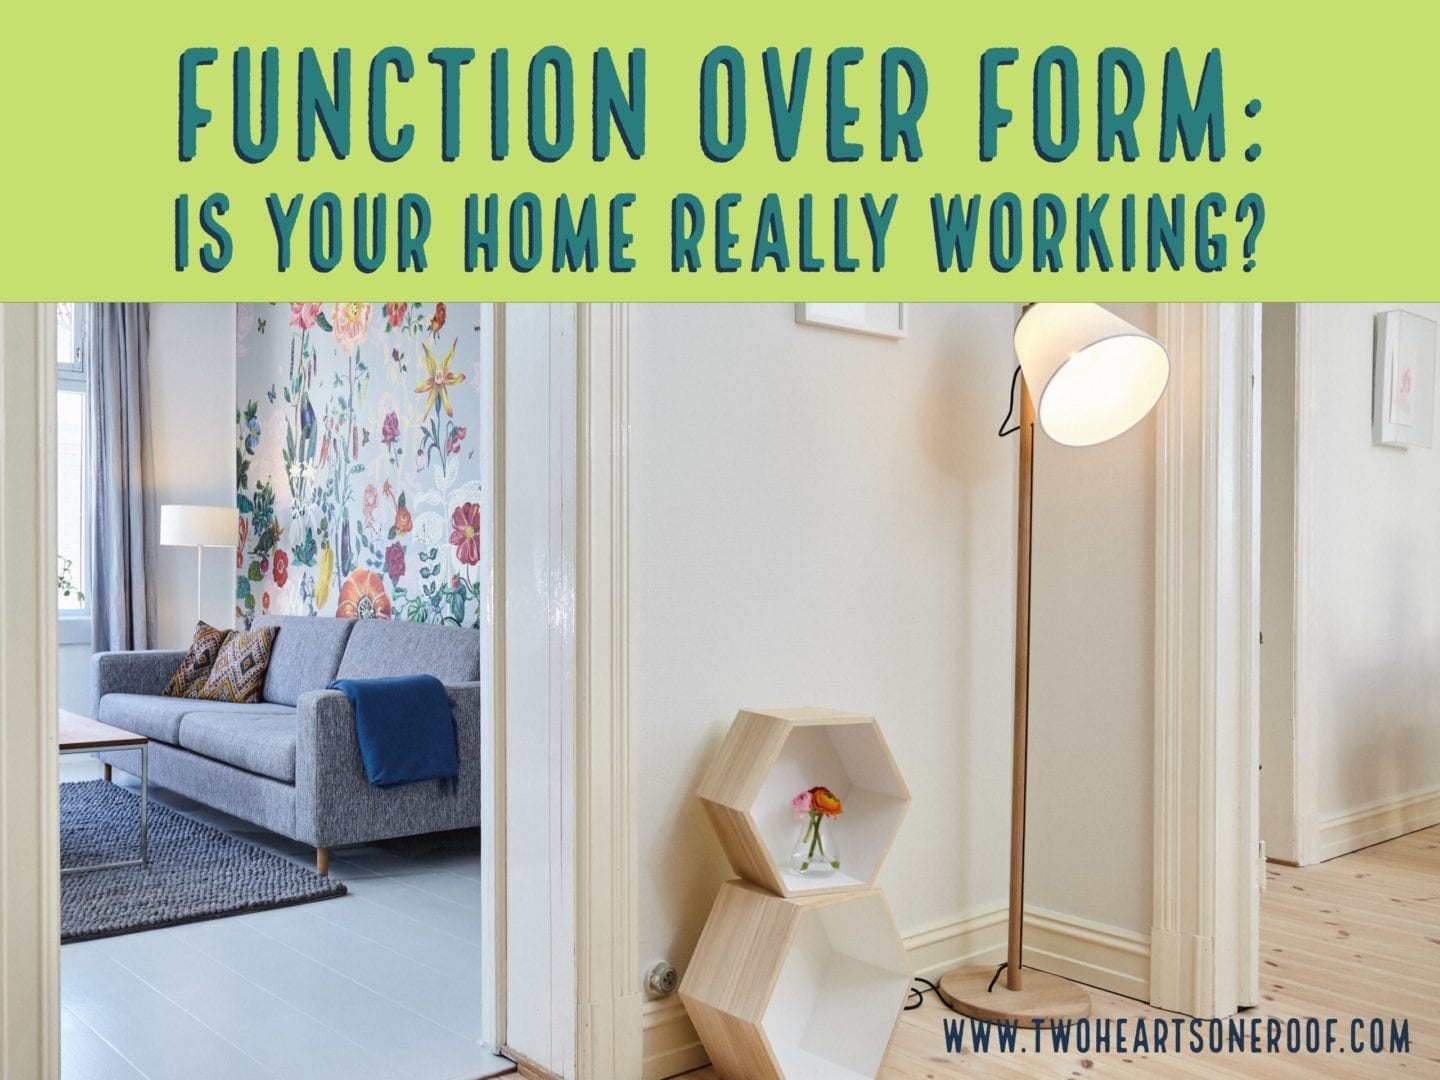 Function Over Form: Is Your Home Really Working?